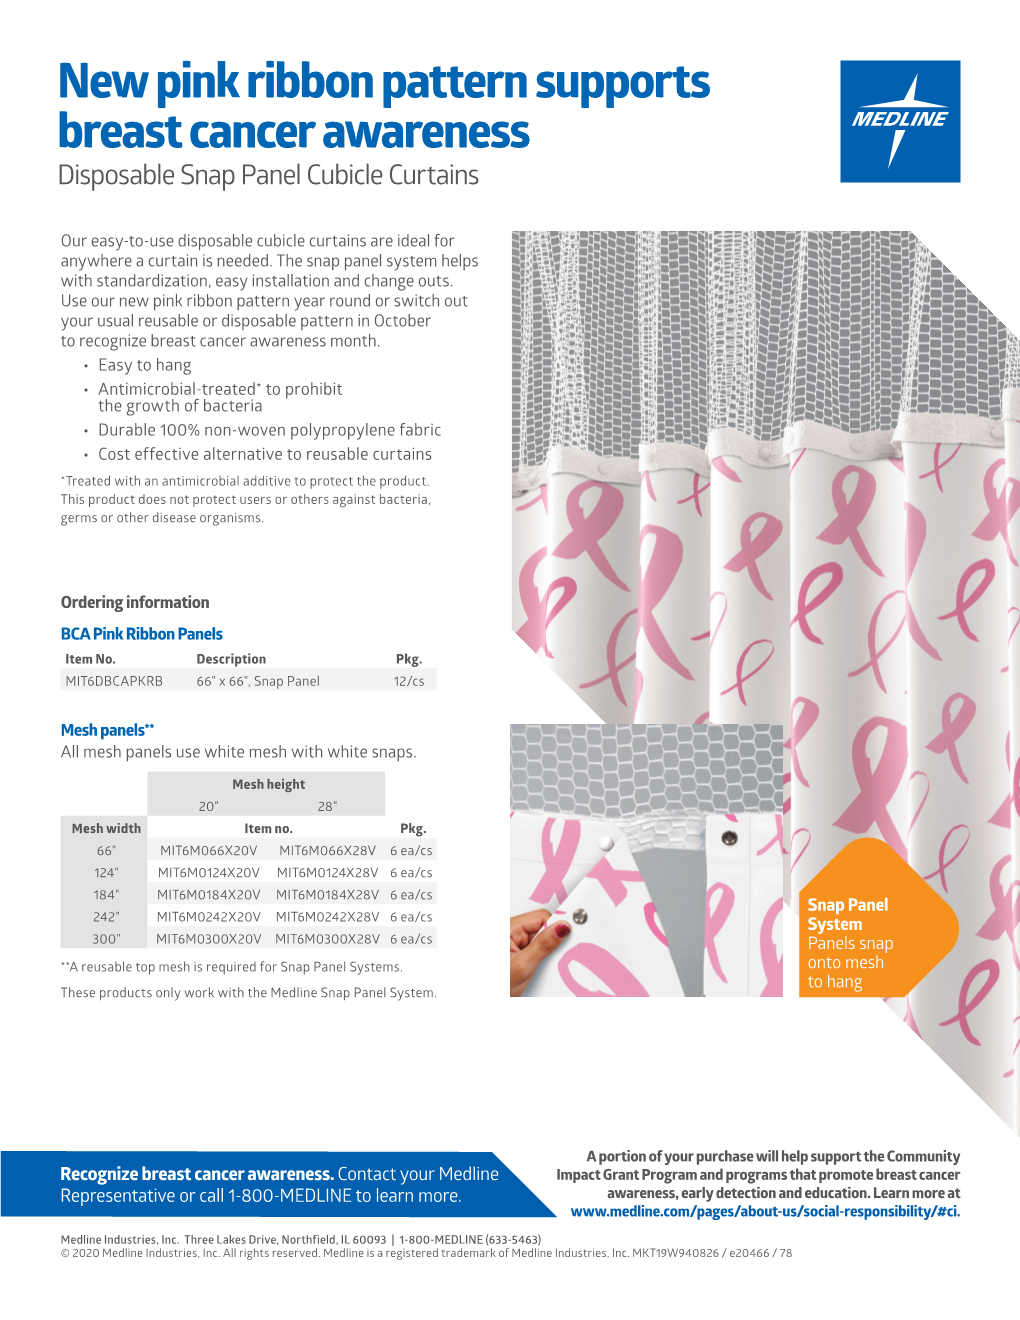 New Pink Ribbon Pattern Supports Breast Cancer Awareness Disposable Snap Panel Cubicle Curtains